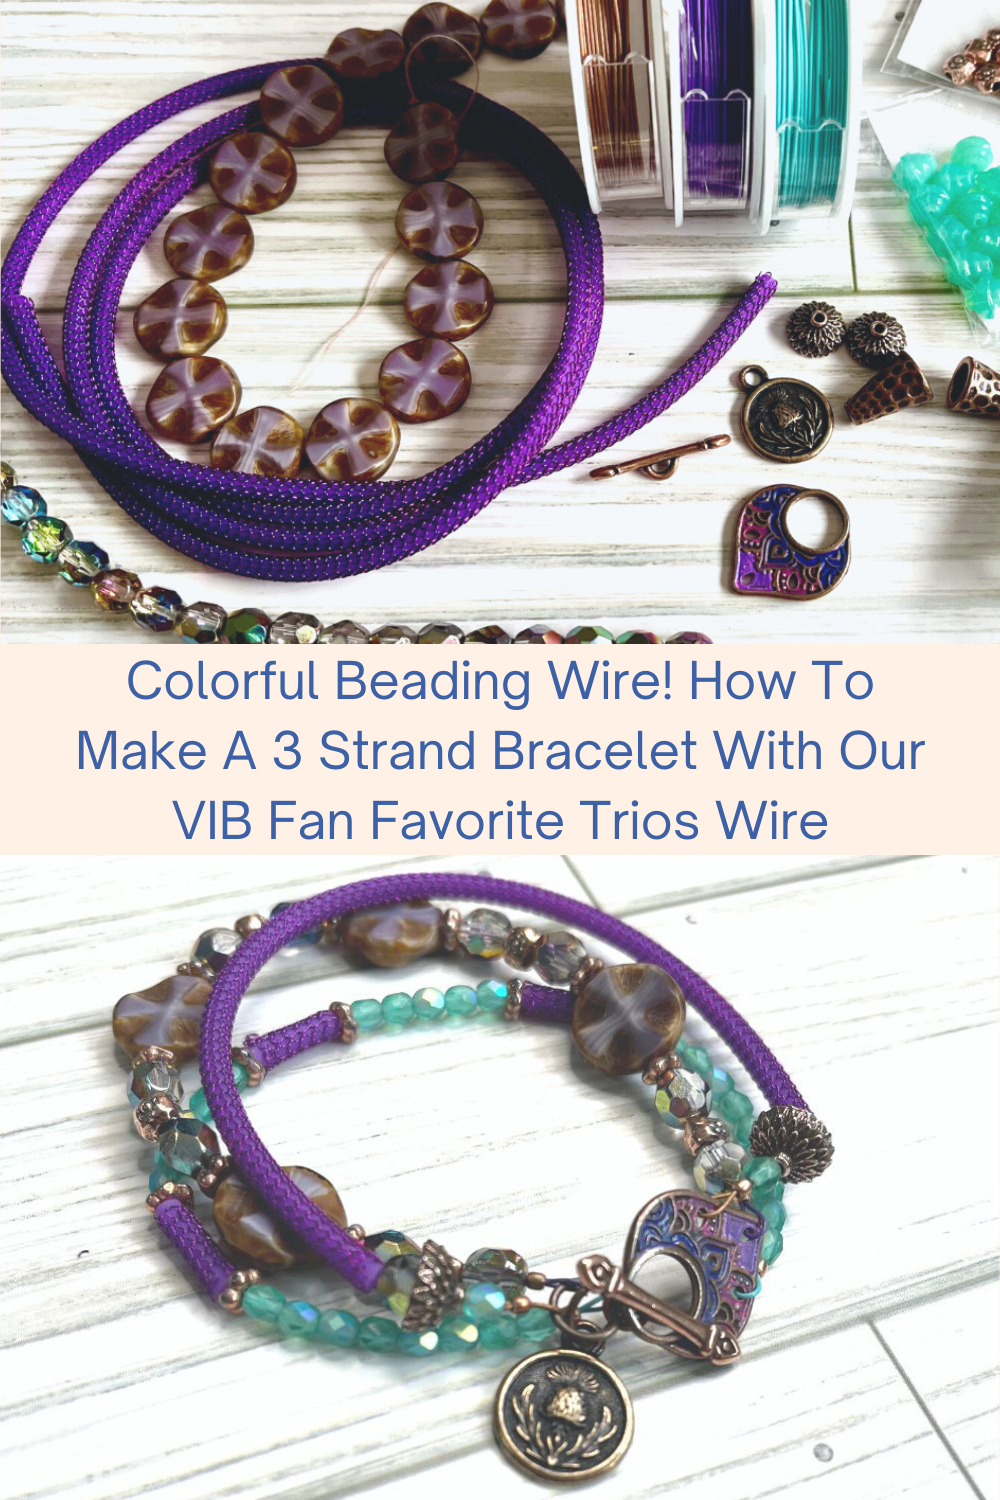 Colorful Beading Wire! How To Make A 3 Strand Bracelet With Our VIB Fan  Favorite Trios Wire - Soft Flex Company